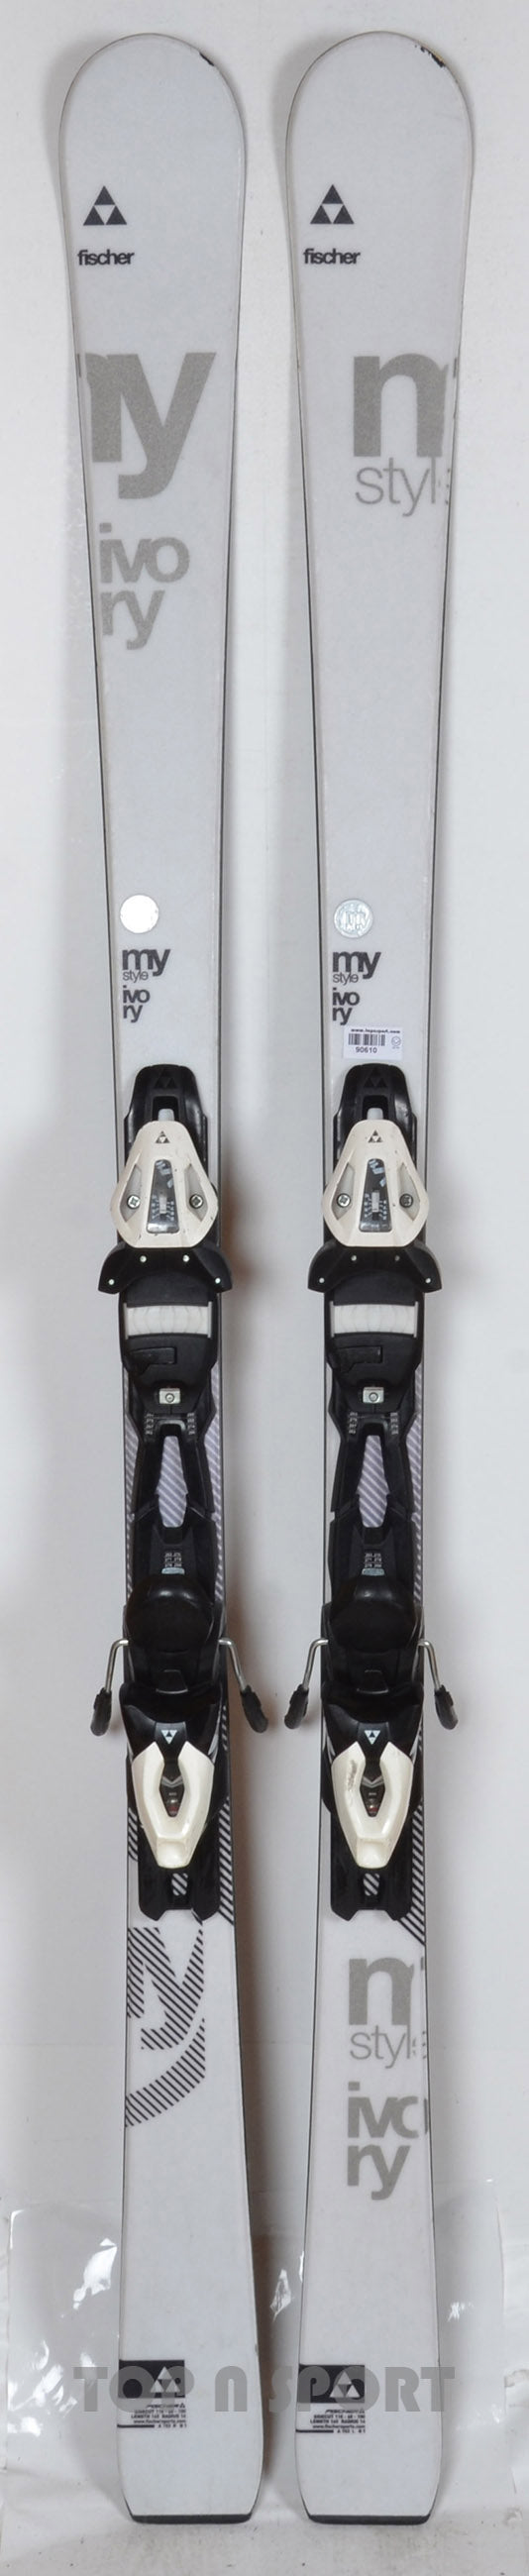 Fischer IVORY MY STYLE - skis d'occasion Femme